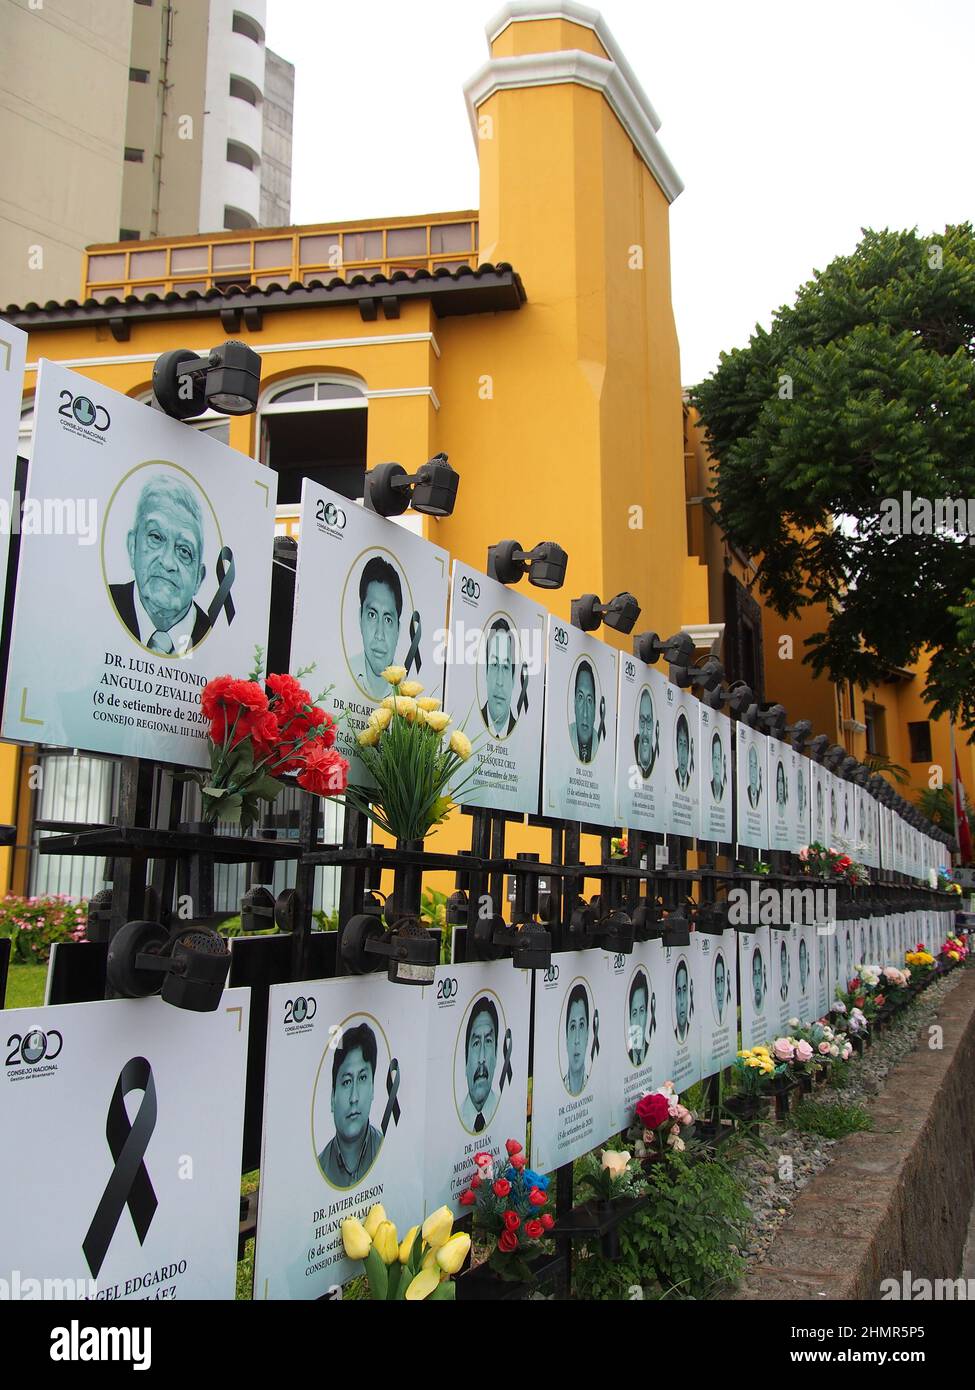 With the decline in infections from the third wave of Covid 19, the pandemic seems to be finally moving away but leaving behind, on the facade of the Peruvian Medical College, as a memorial; hundreds of black ribons and portraits of Peruvian doctors who died on duty when fighting the pandemic. Peru has so far suffered the death of more than 200 thousand citizens due to covid-19.Representatives of the Medicine college give statements in front of a black ribbon and portrait photos of deceased on duty Peruvian doctors, during the coronavirus pandemic (Covid-19). Stock Photo